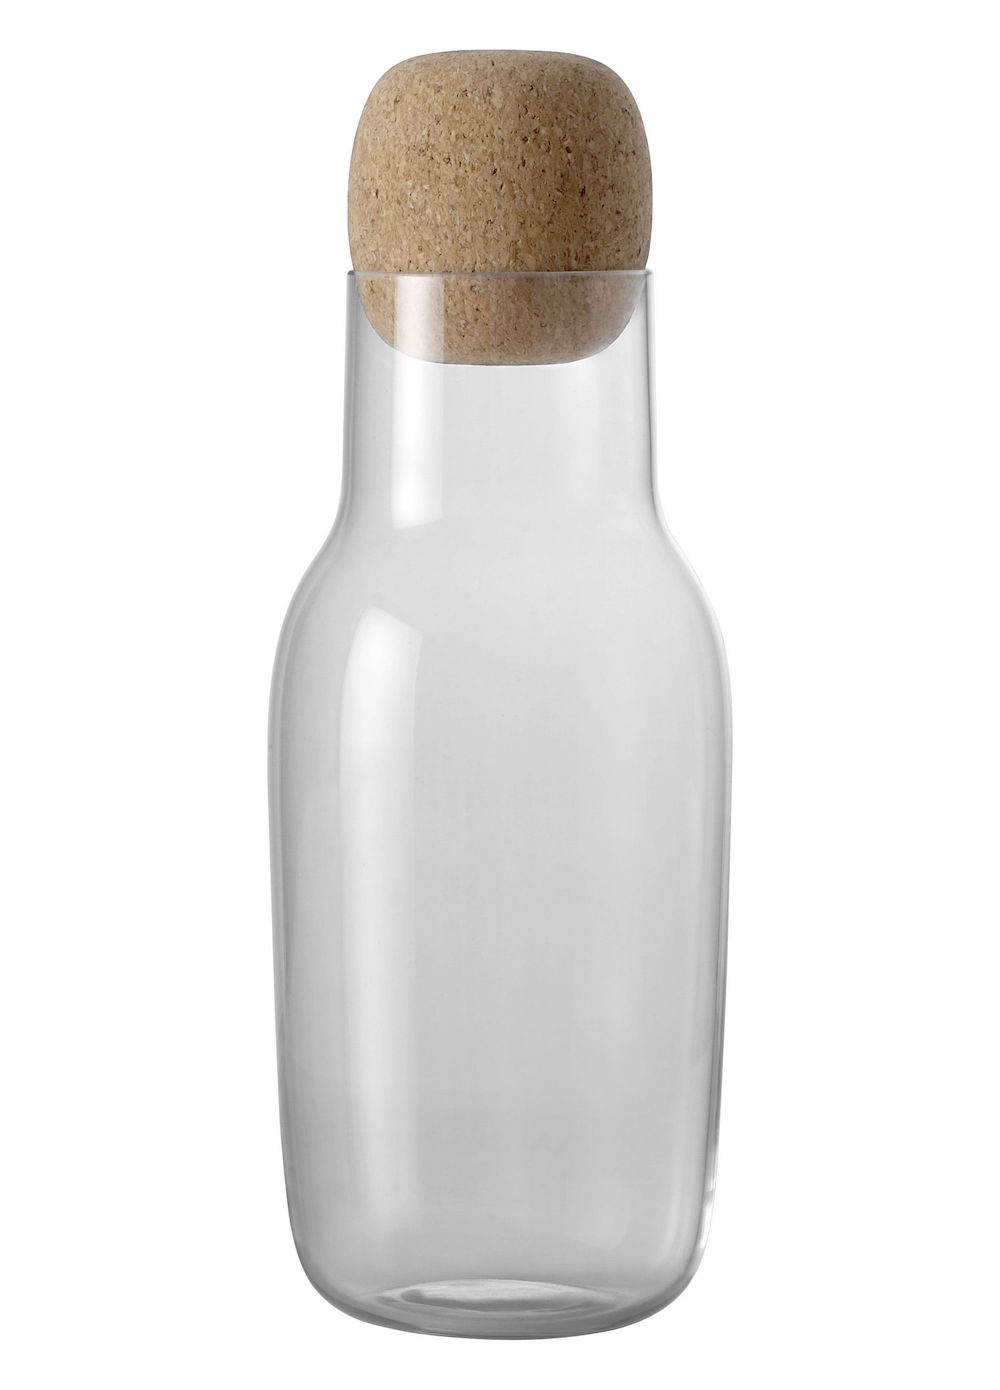 The Cork Roundup - Corky Carafe by Muuto